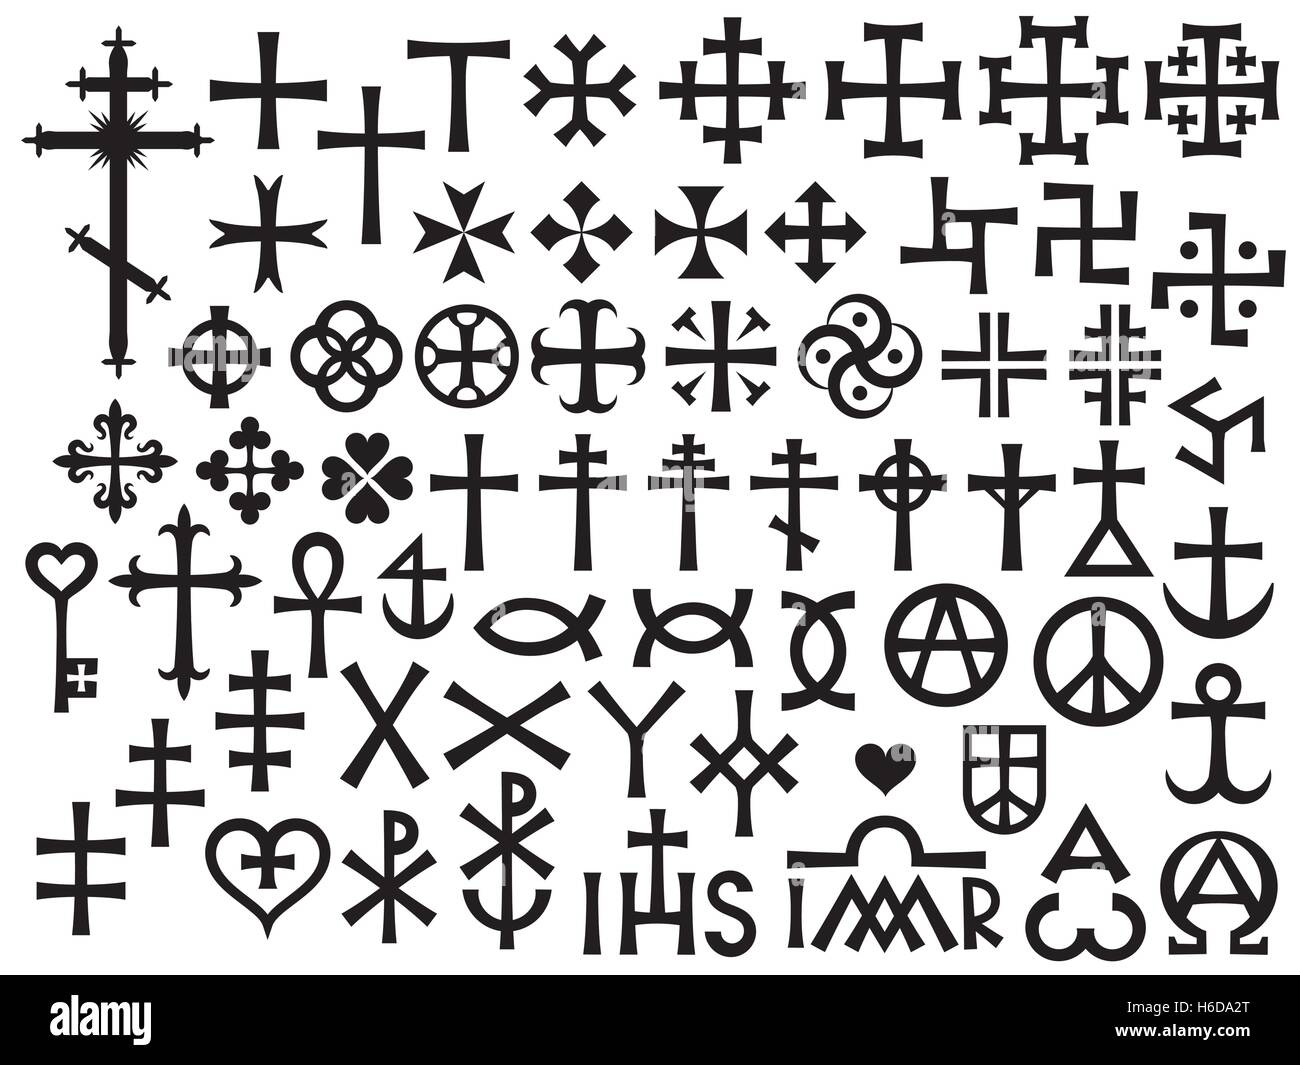 Heraldic Crosses and Christian Monograms (with Additions and more) Stock Vector